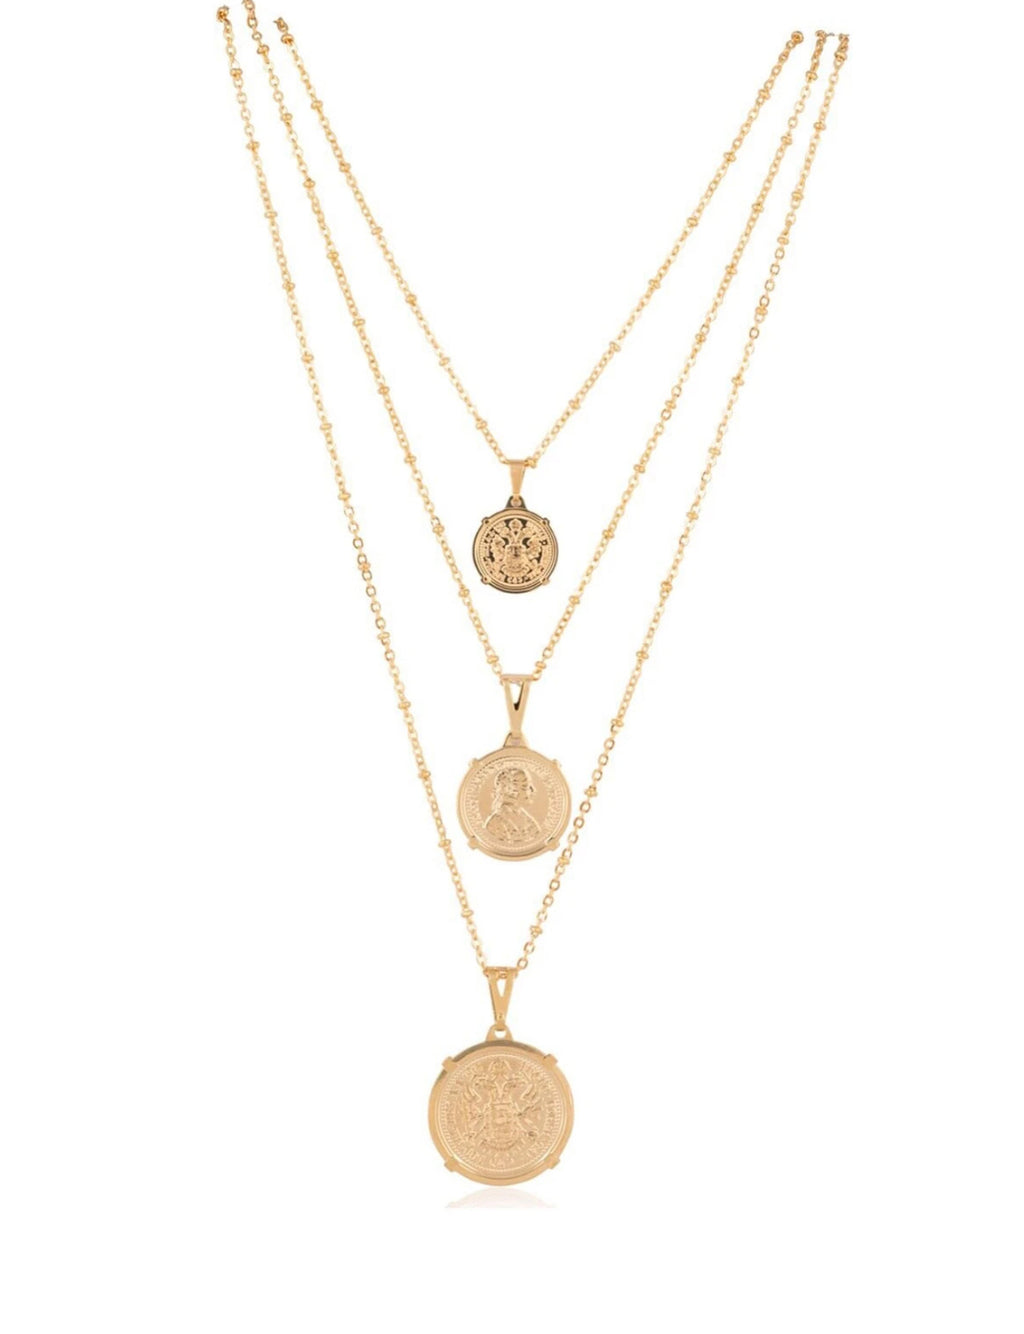 Emperor Coin Necklace 20" in Gold